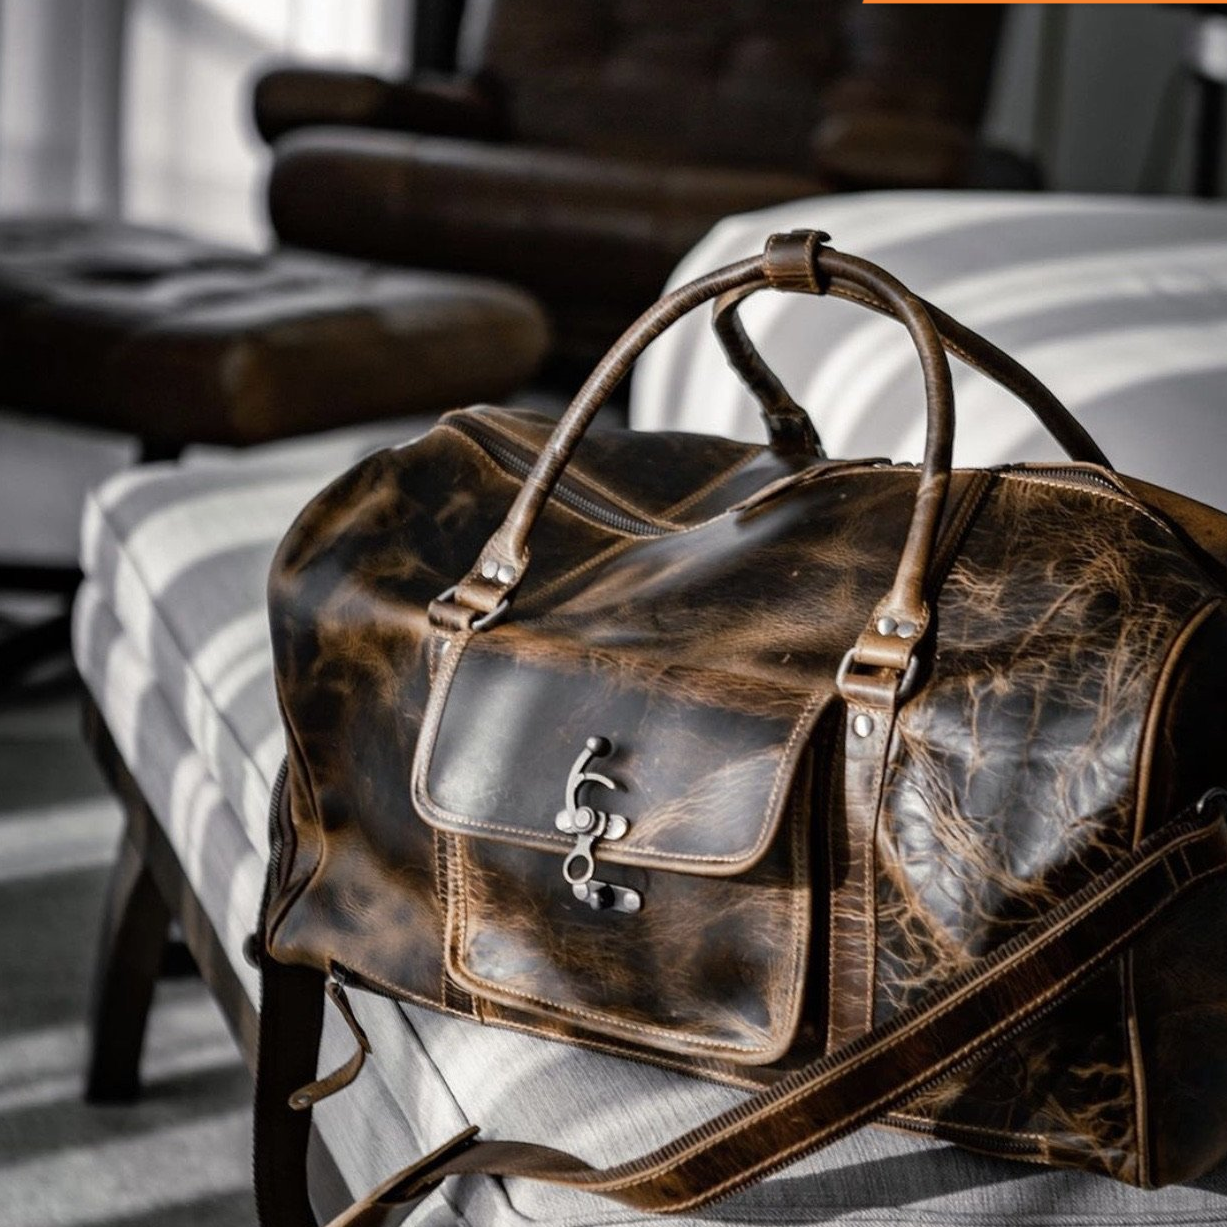 Handsome range of luxury buffalo leather travel products and gift